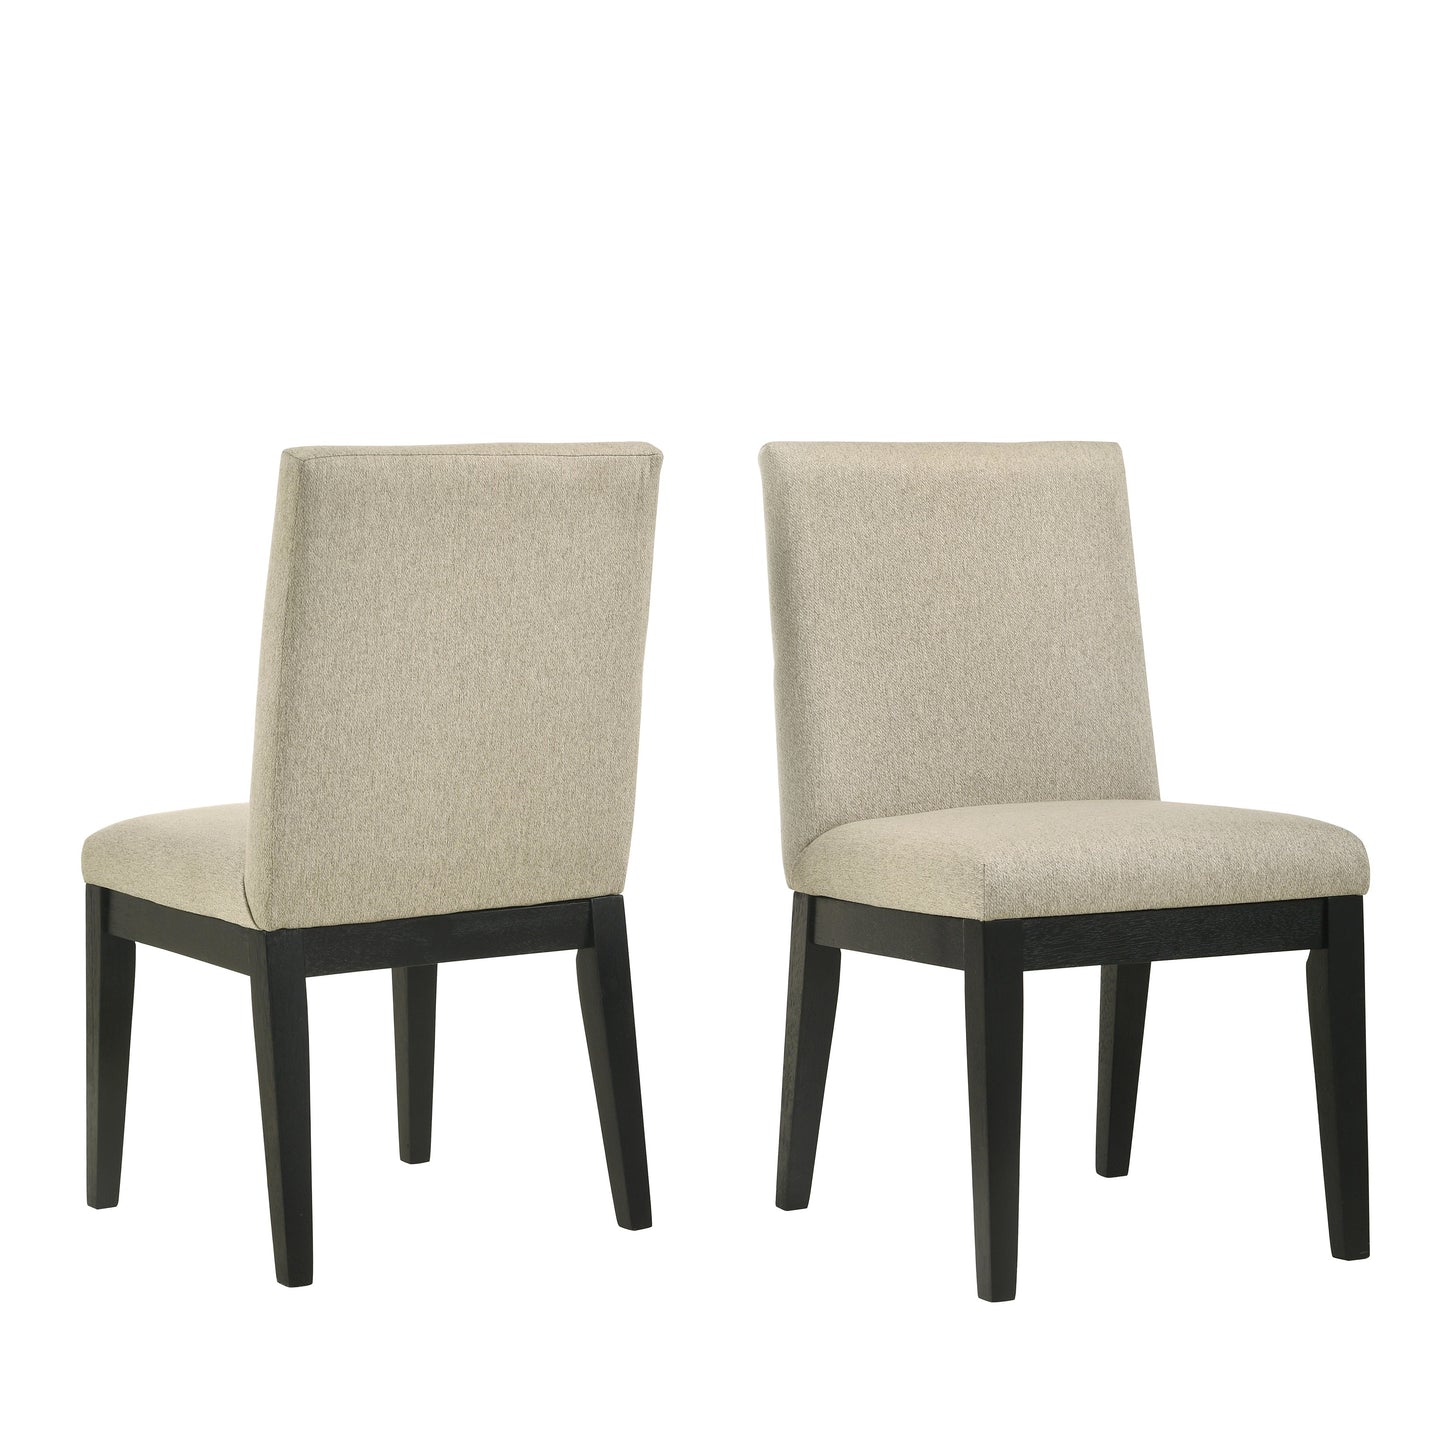 Roundhill Furniture Rocco Contemporary Solid Wood Dining Chairs, Set of 2, Beige